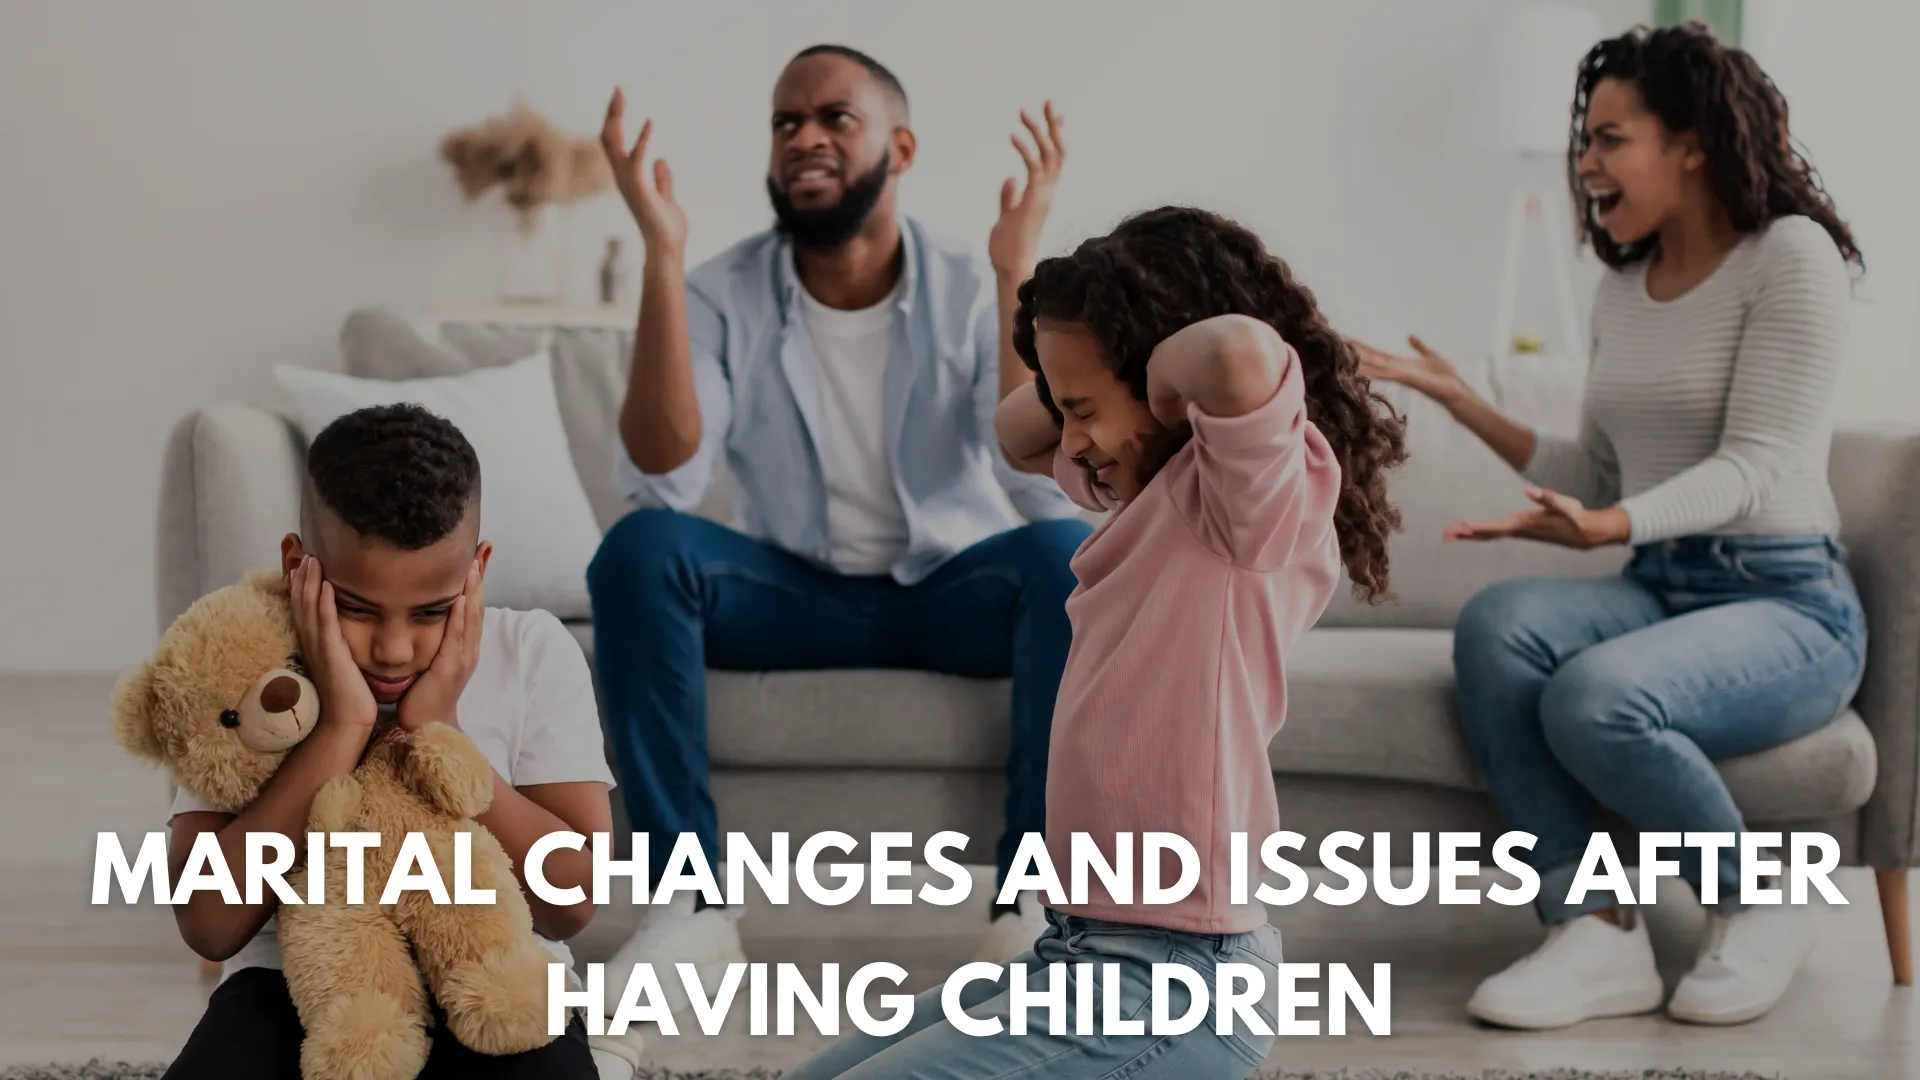 Marital changes and issues after having children